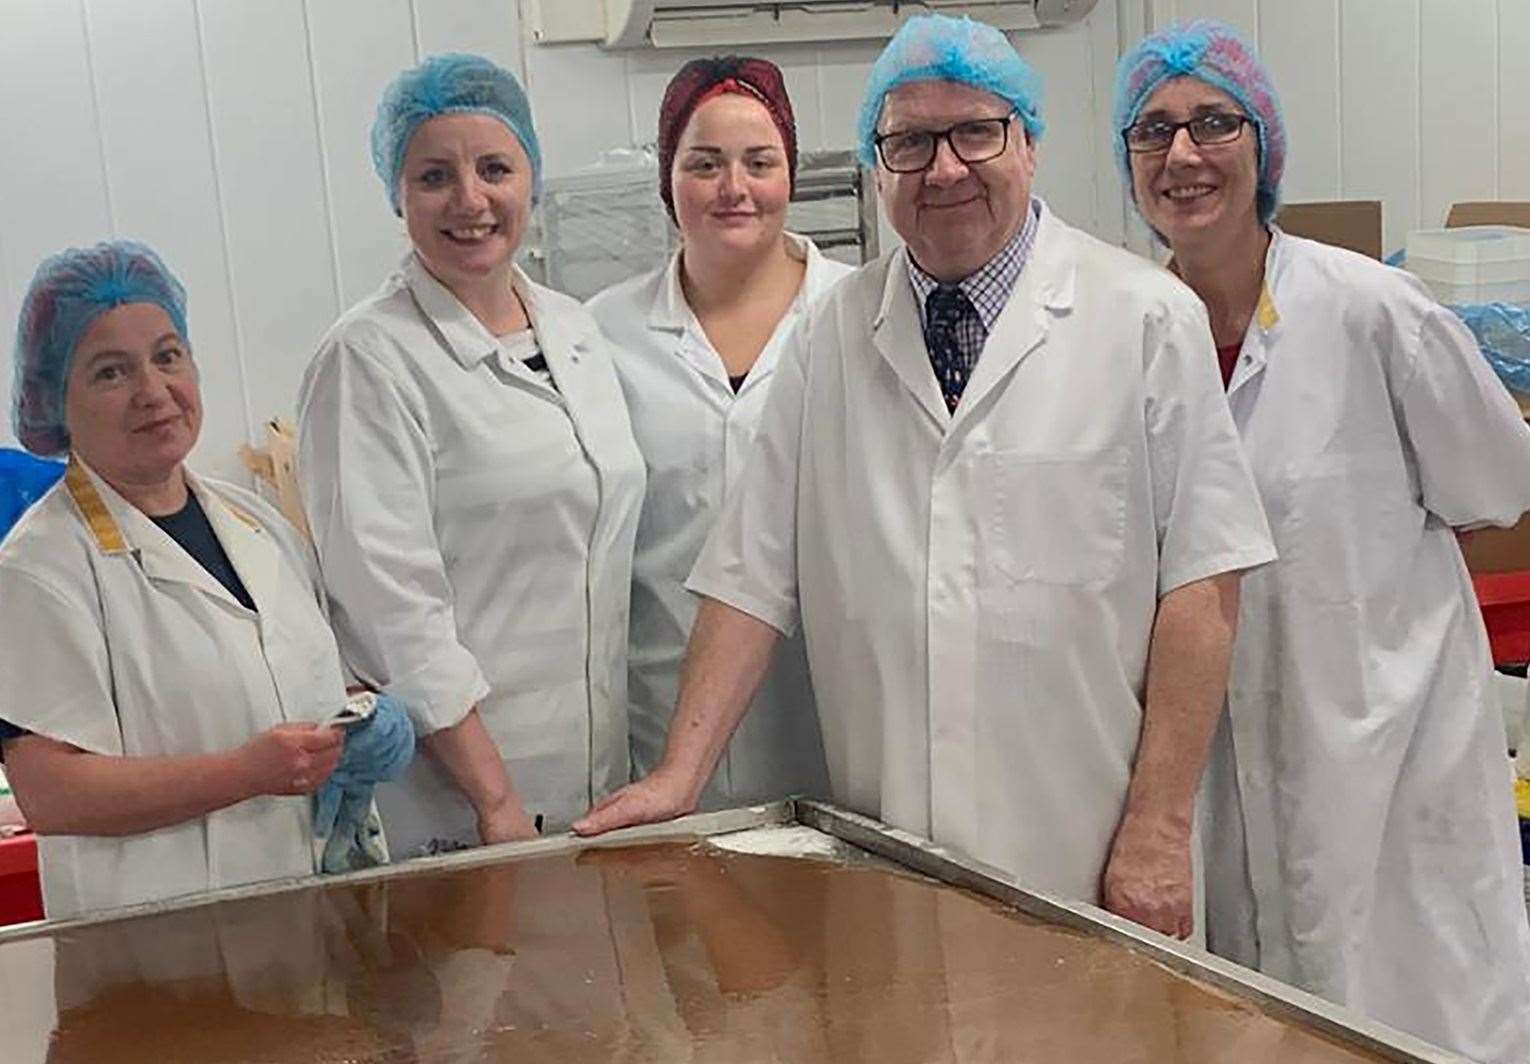 Derek Shaw with the team of Mackie's staff - Deirdre Henderson, Pauline Taylor, Angela Grubb and Louise Hunter - at the factory in Aberdeenshire taken before the Covid-19 pandemic. Picture: Mackie's of Scotland